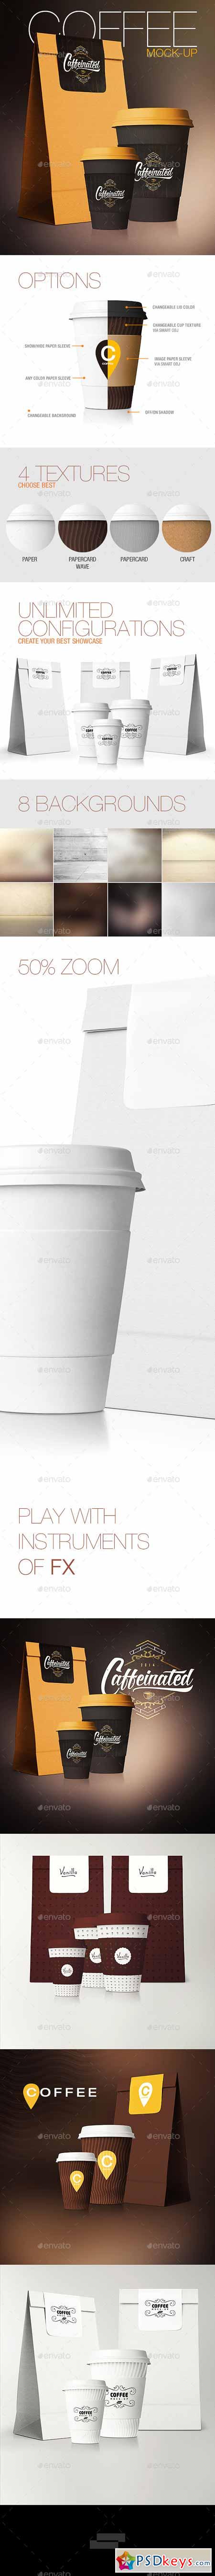 Coffee Cup Coffee Package Mock-Up 11415496